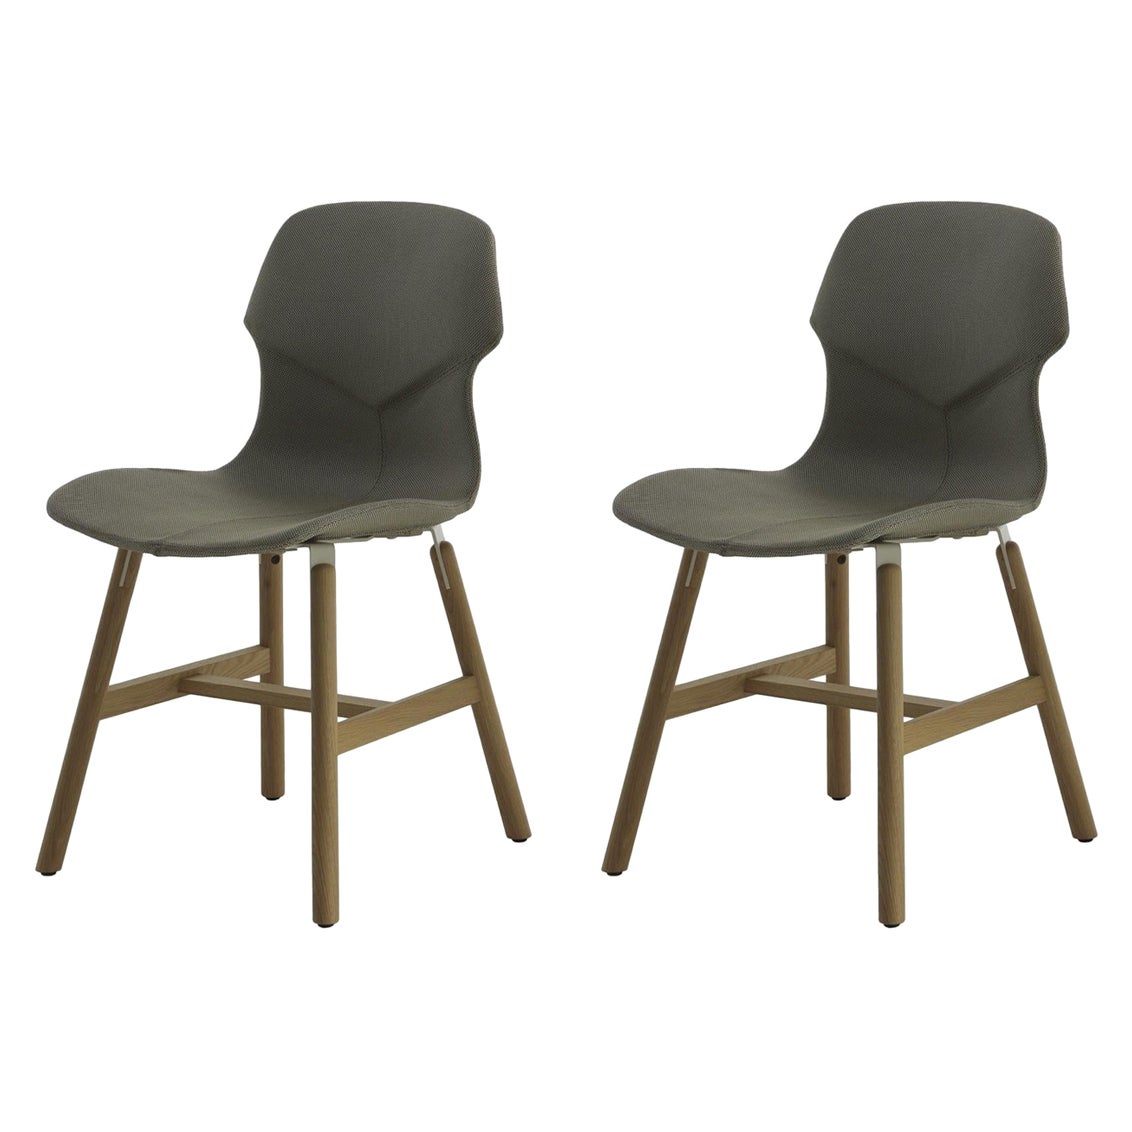 Stereo Set of 2 Gray Chairs by Luca Nichetto